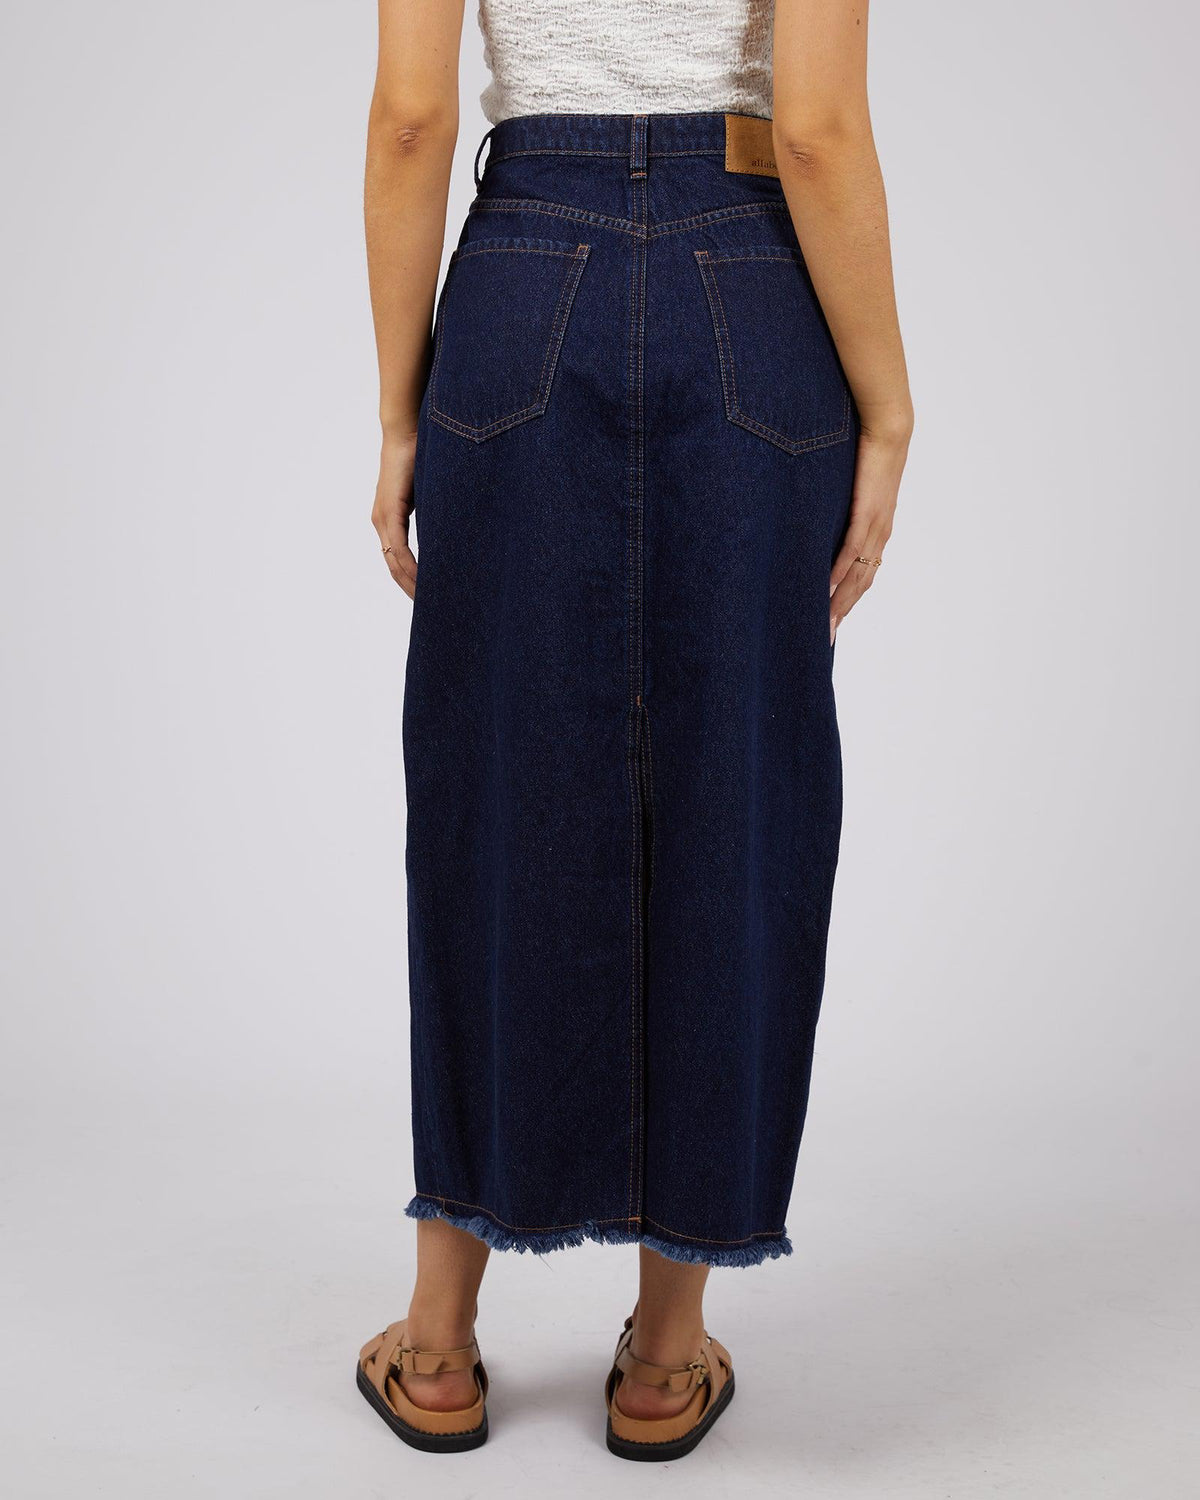 All About Eve-Ray Denim Maxi Skirt Organic Blue-Edge Clothing